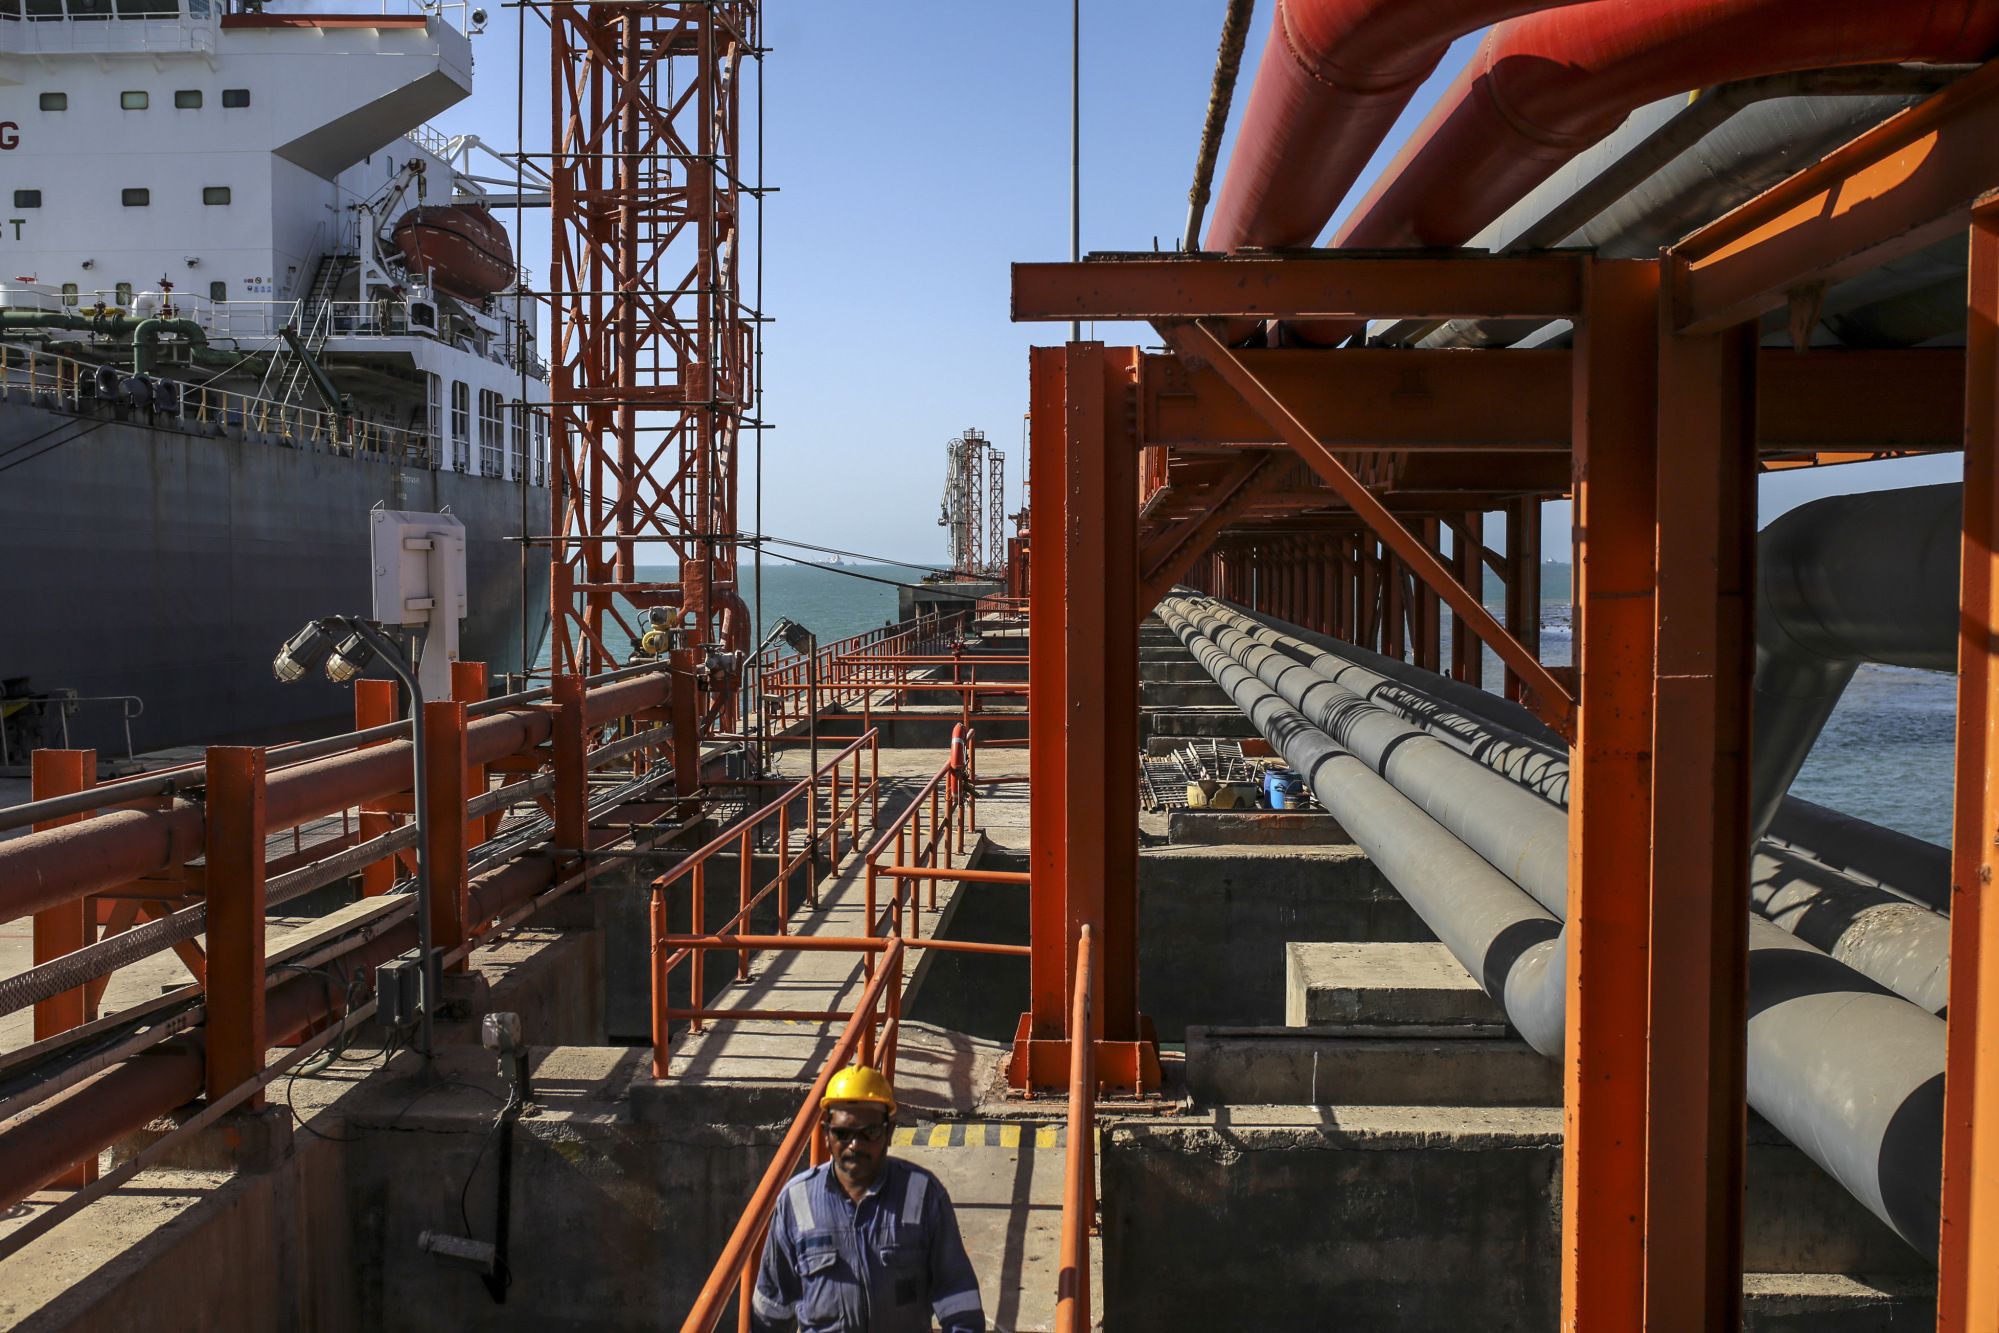 A worker walks along a jetty as a ship sits docked at the Vadinar Refinery complex operated by Nayara Energy Ltd., formerly known as Essar Oil Ltd. and now jointly owned by Rosneft Oil Co. and Trafigura Group Pte., near Vadinar, Gujarat, India, on Wednesday, April 25, 2018. The refinery was the crown jewel in a blockbuster $13 billion acquisition that, at the time, represented the largest foreign direct investment in India's history. The deal marked Trafigura's coming of age. Photographer: Dhiraj Singh/Bloomberg